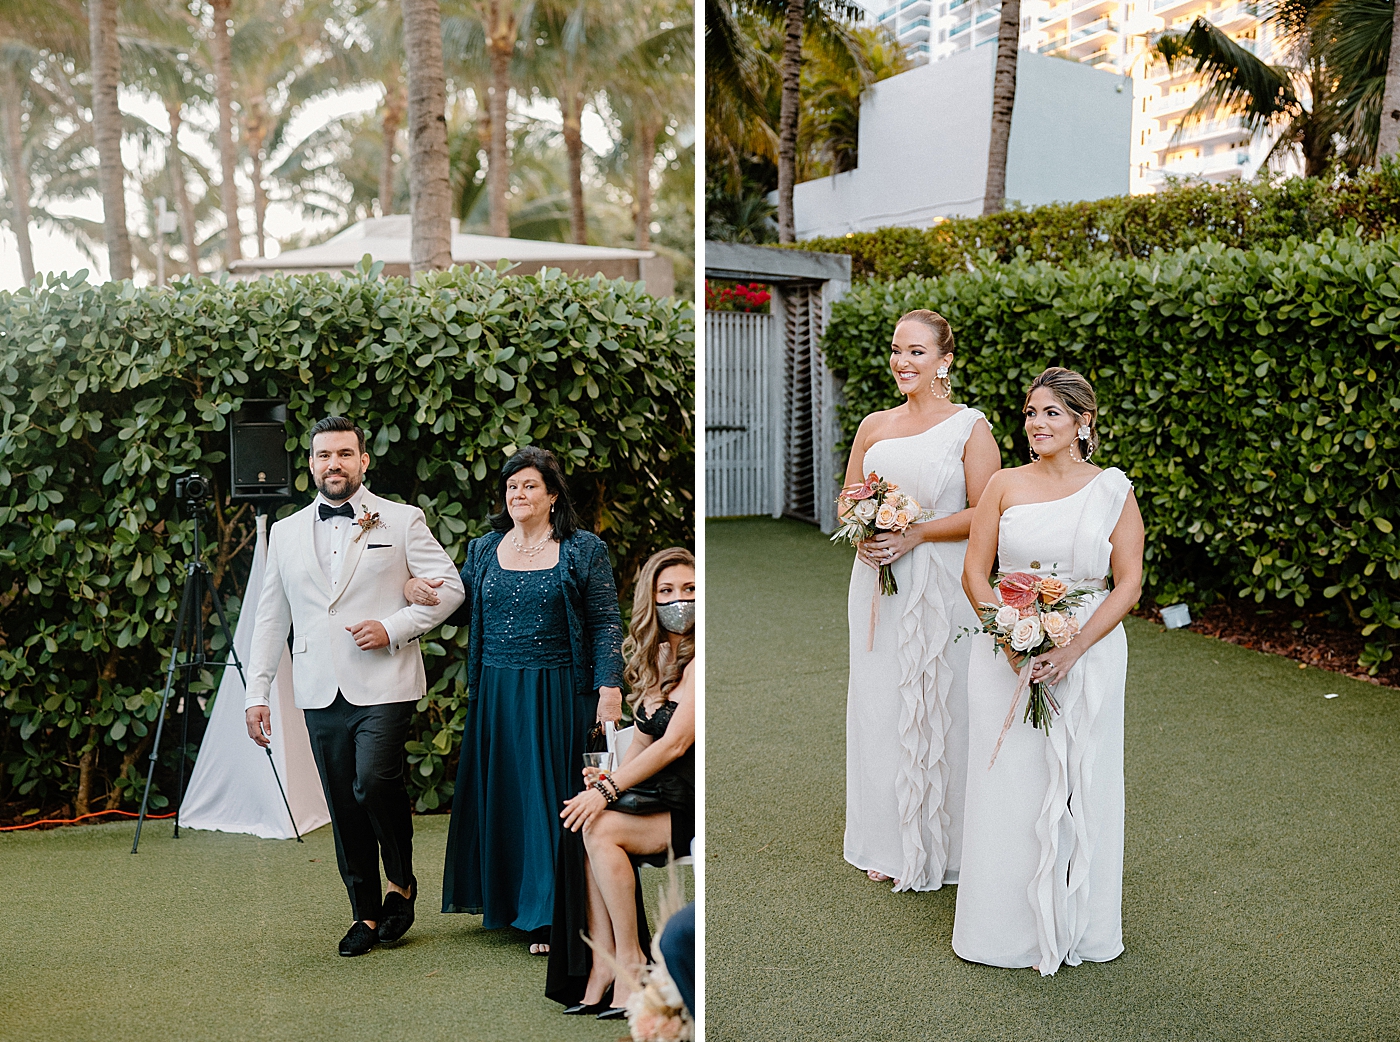 Ceremony groom entering with mother and Bridesmaids standing with bouquets Modern Elegant Wedding at The W South Beach captured by South Florida Wedding Photographer Erika Tuesta Photography